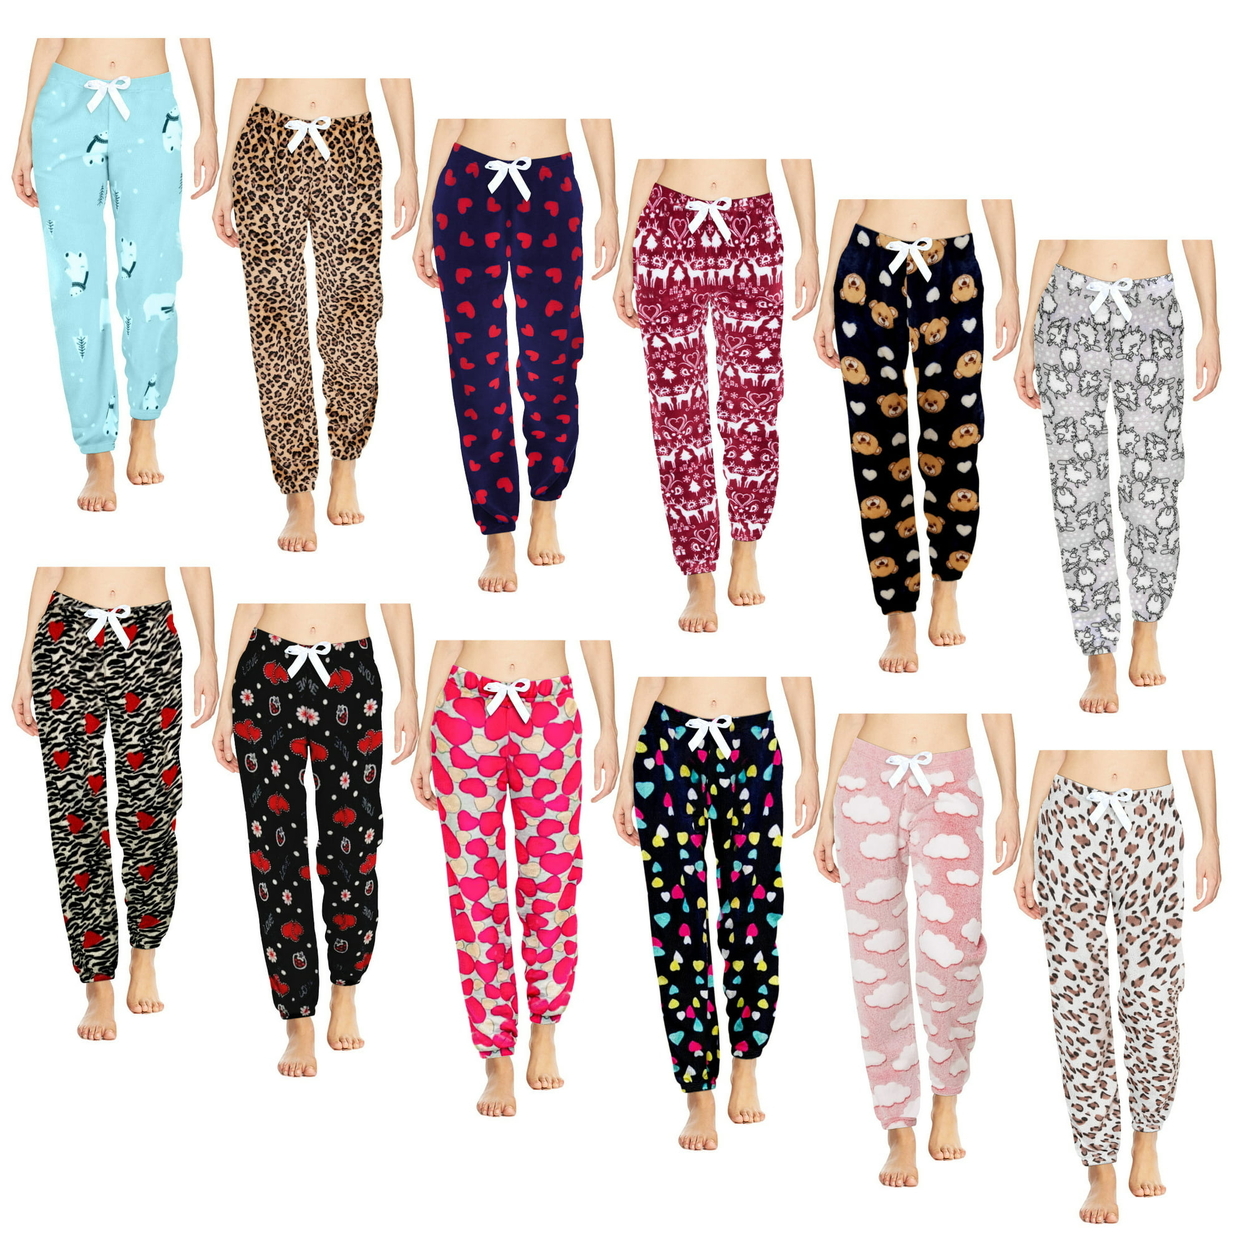 3-Pack: Women's Printed Ultra-Soft Comfy Stretch Micro-Fleece Pajama Lounge Pants - Small, Shapes